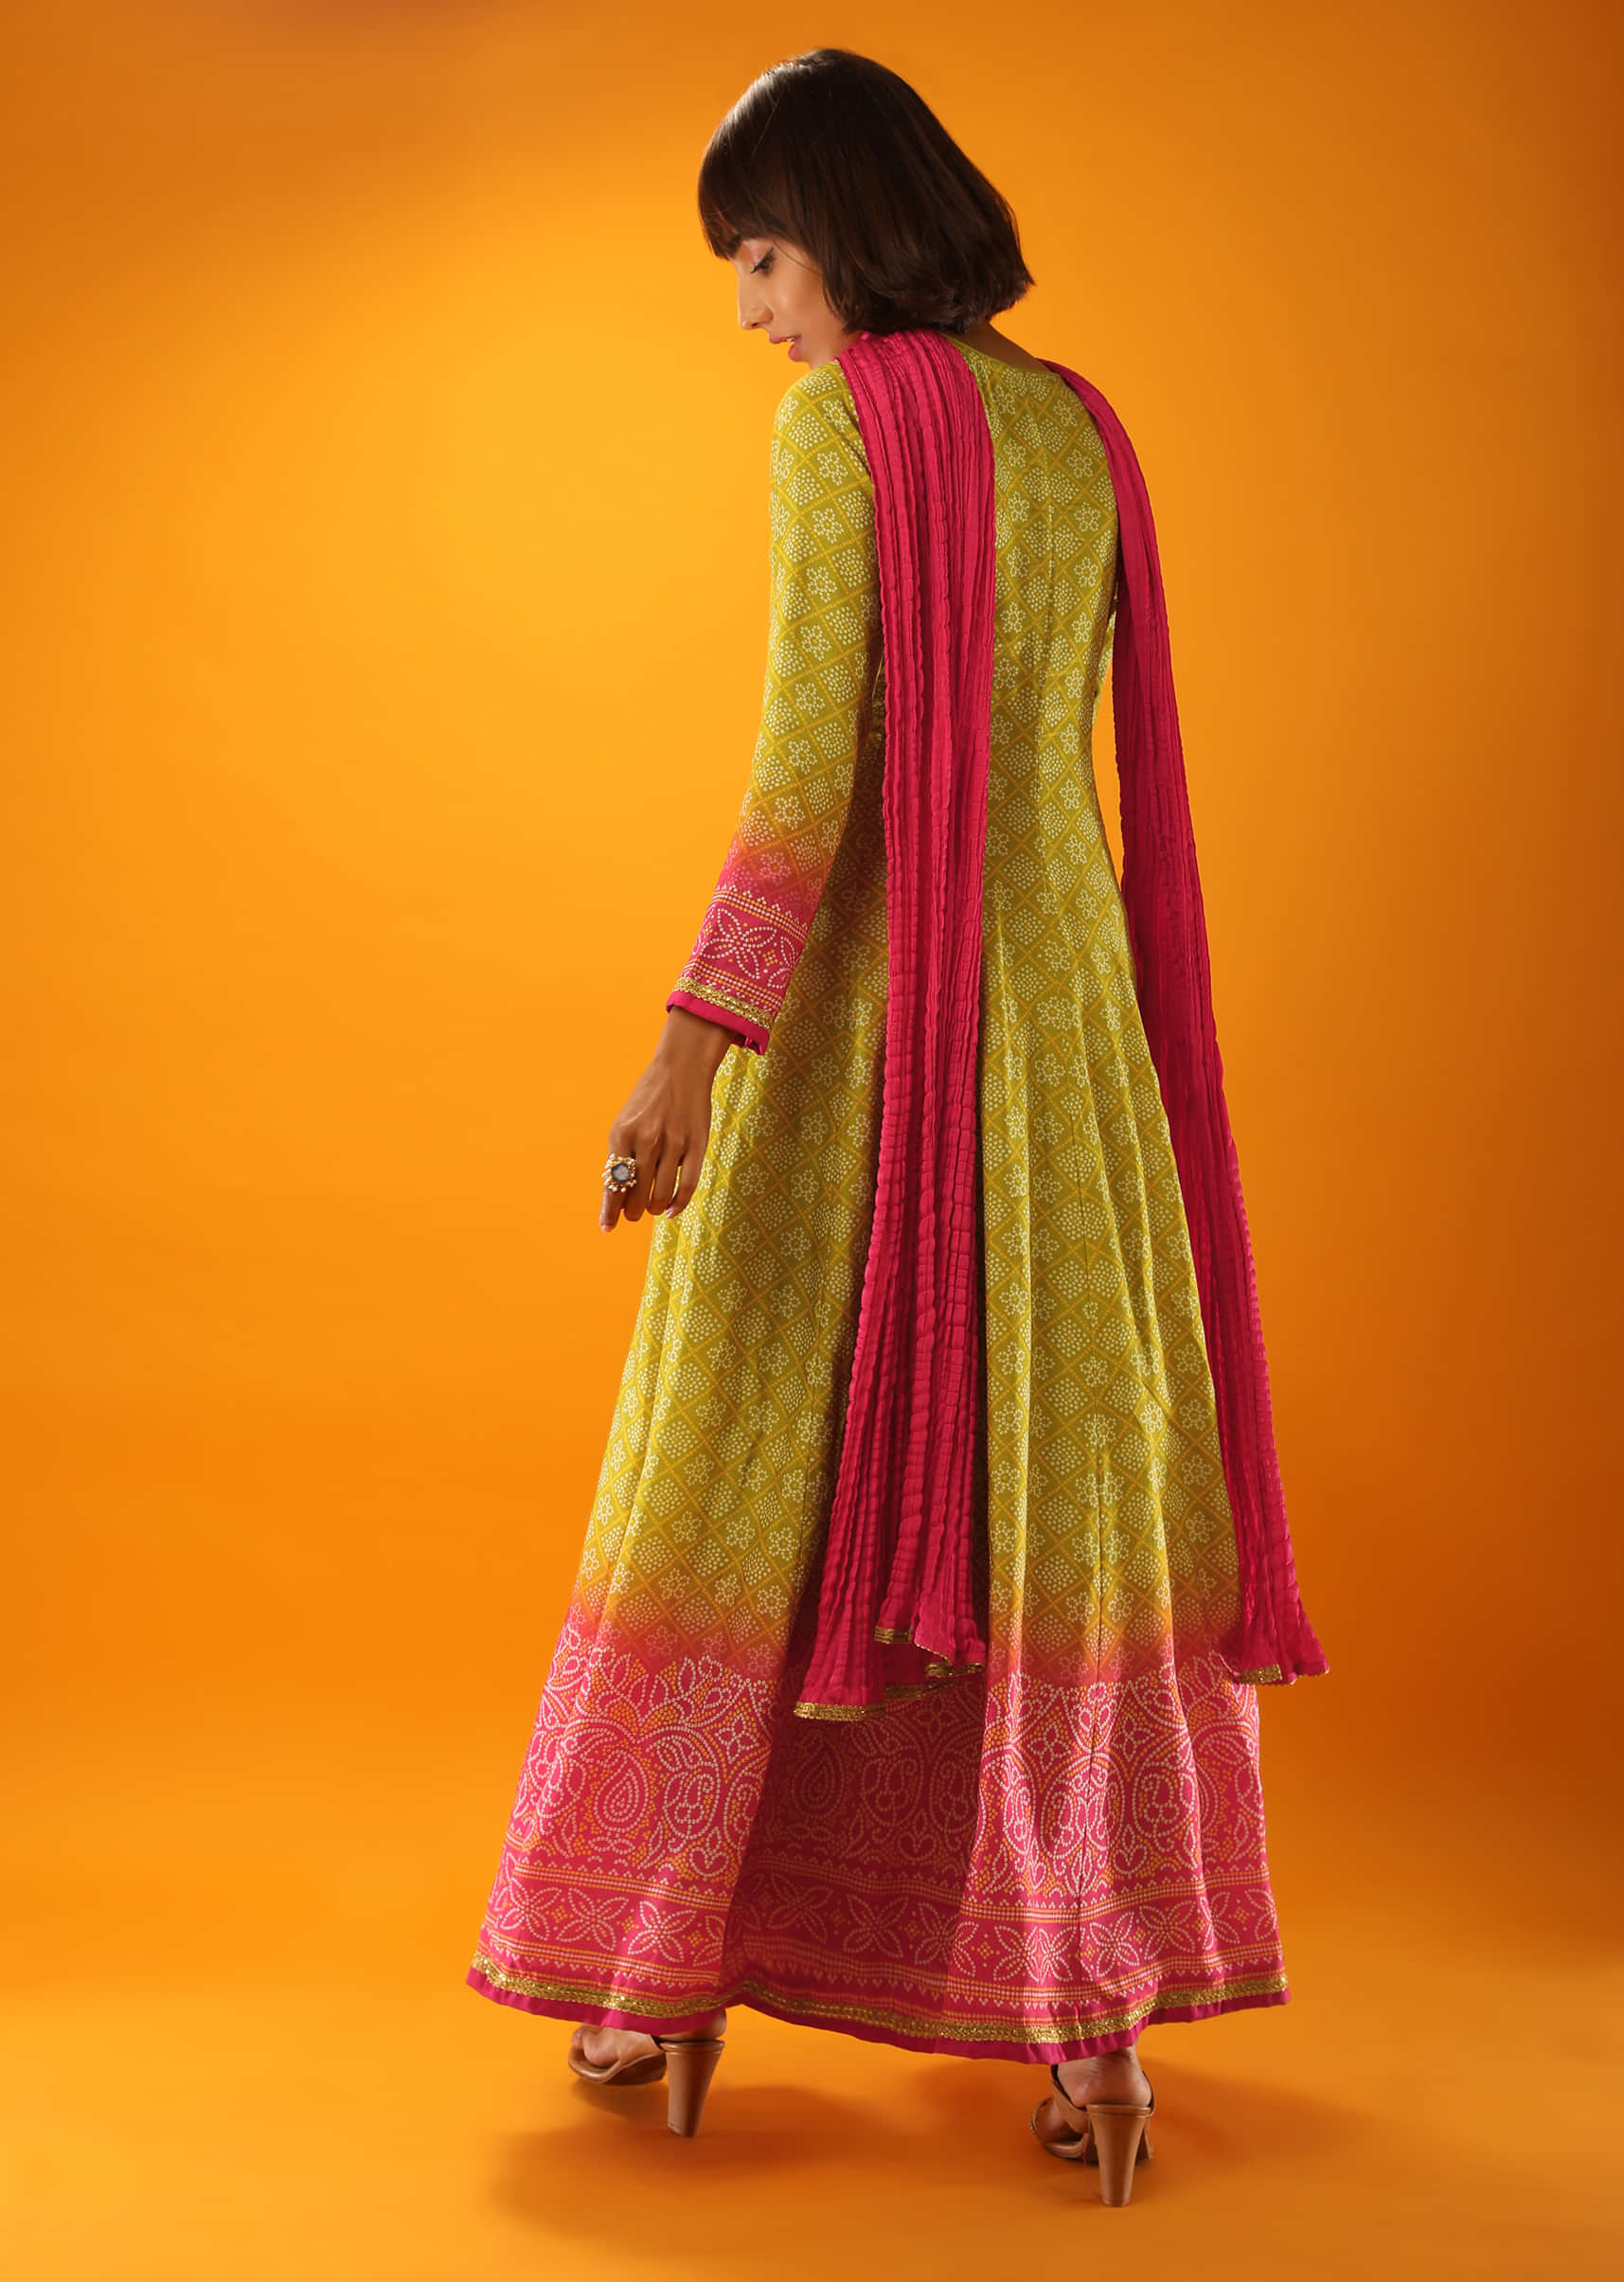 Apple Green And Fuchsia Ombre Anarkali Suit In Cotton Silk With Bandhani Design And Gotta Patti Embroidered Placket  